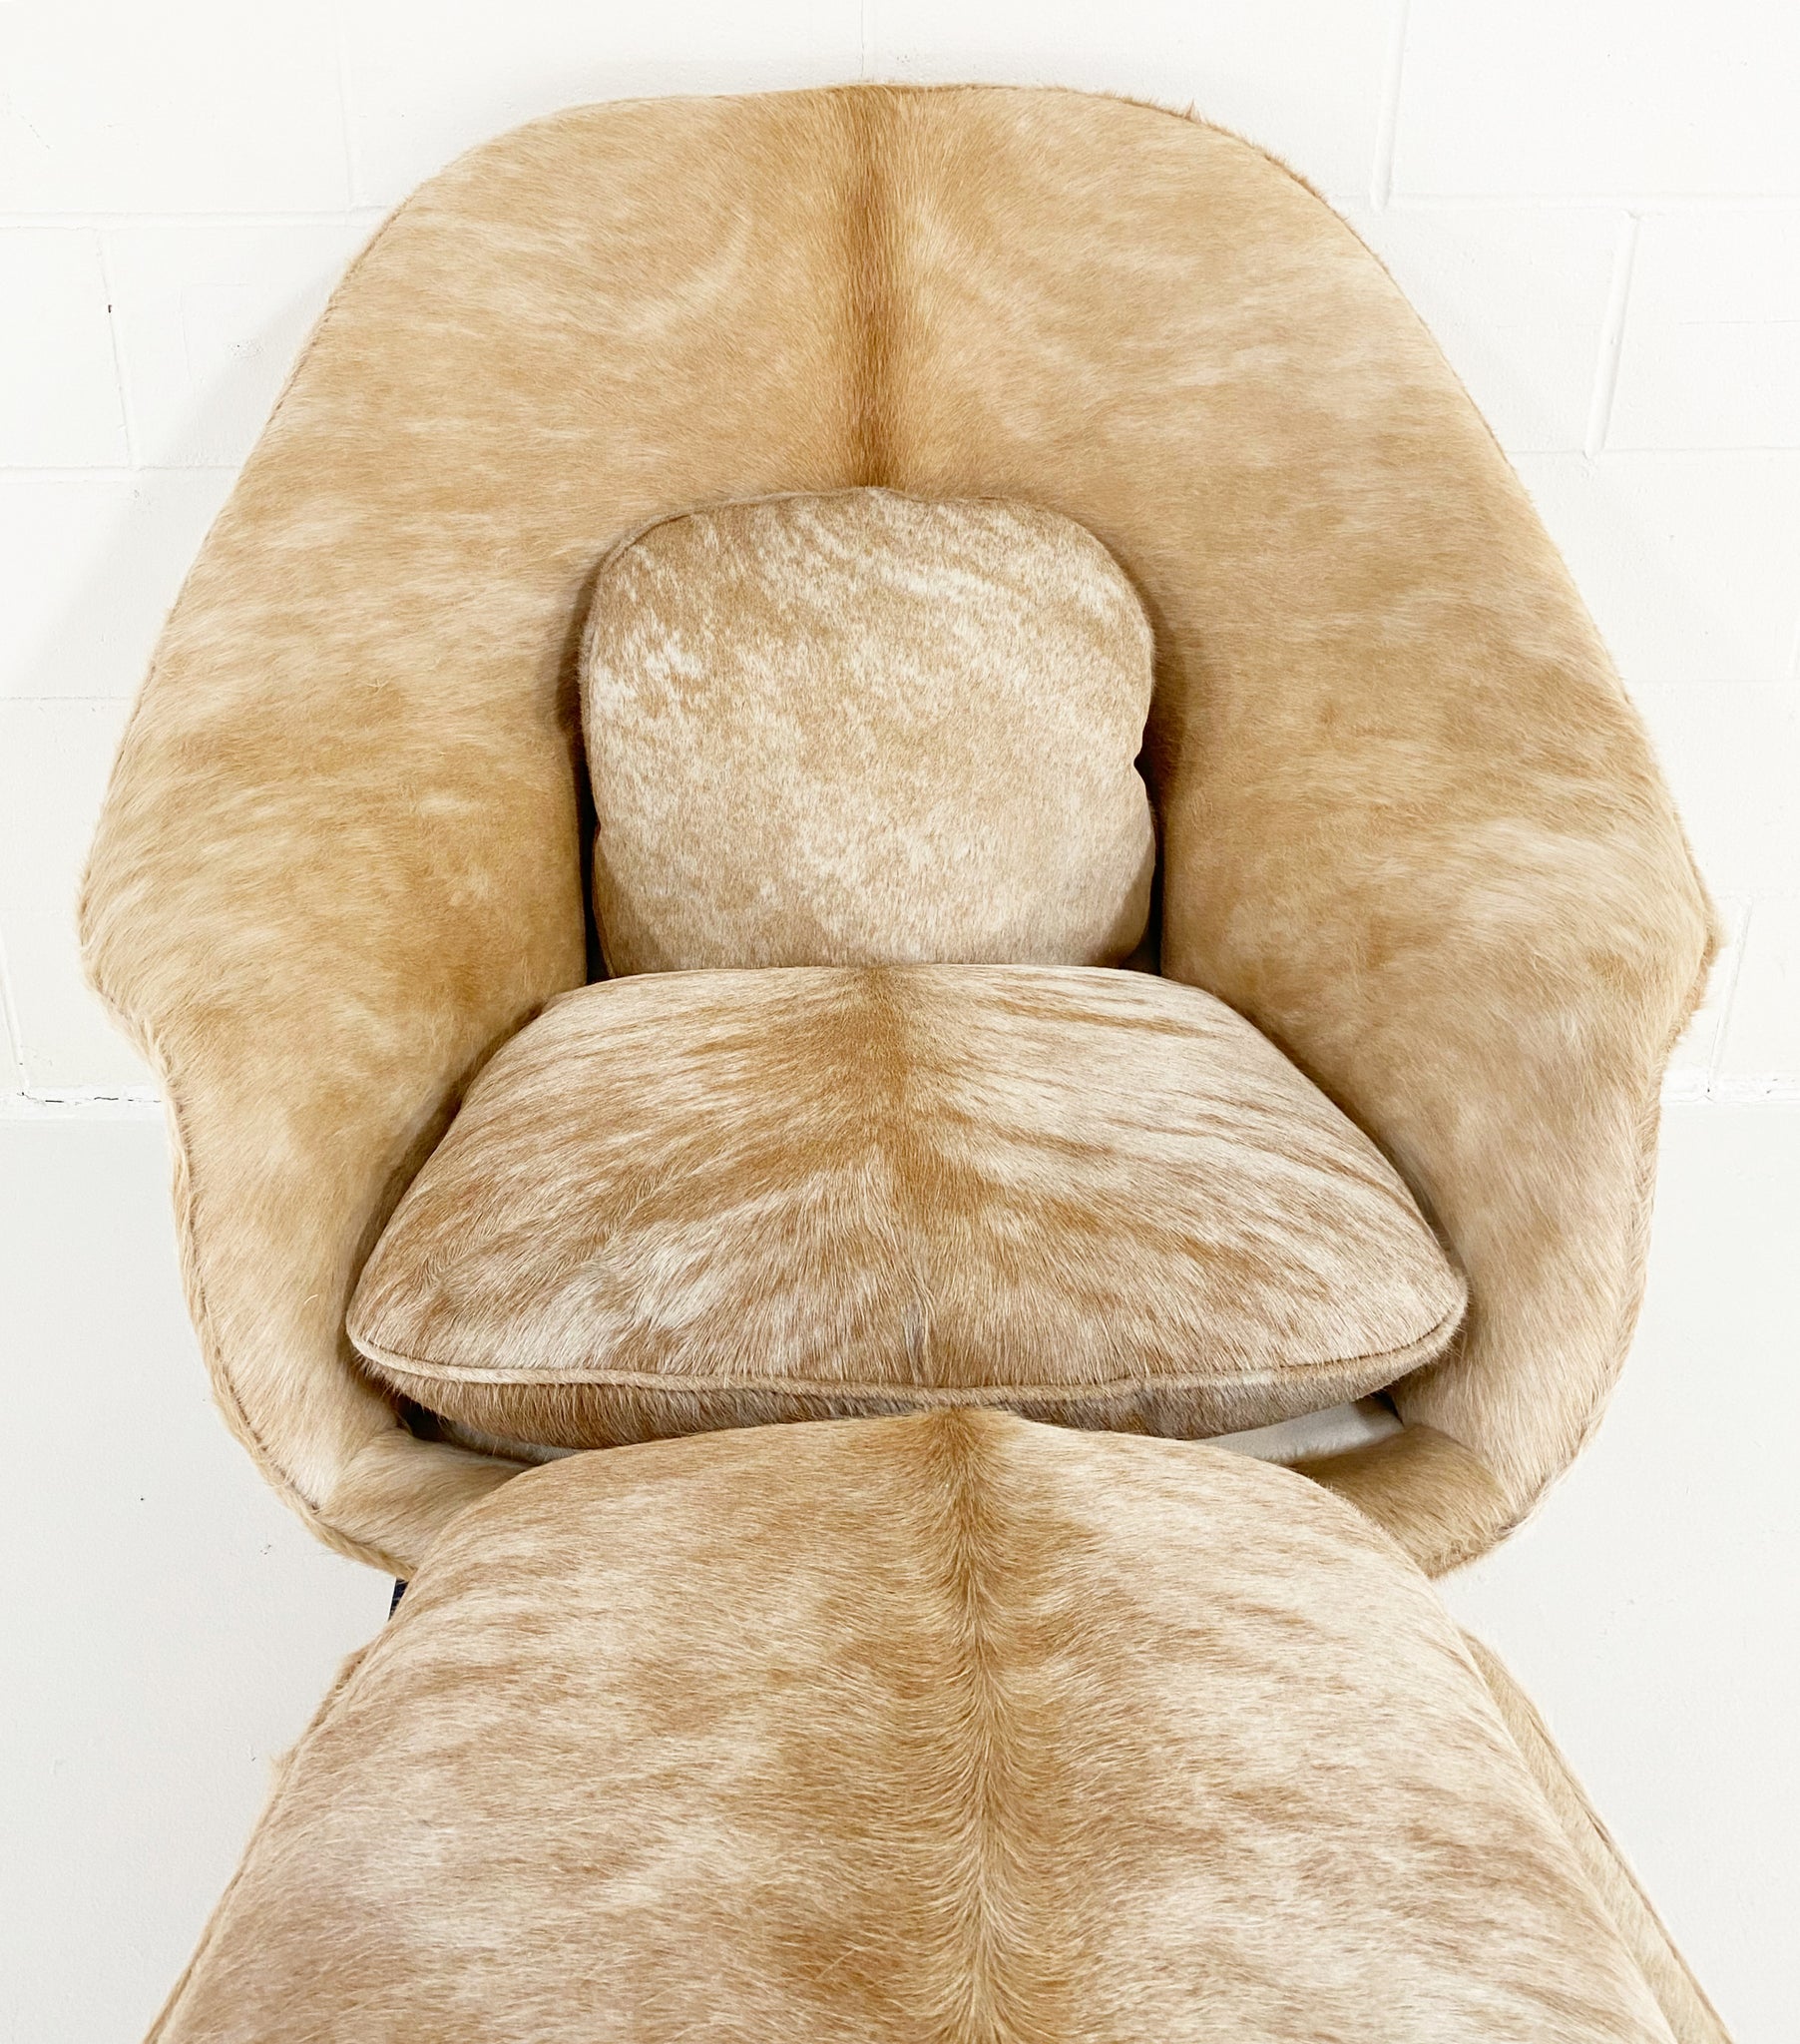 One-of-a-Kind Womb Chair and Ottoman in Brazilian Cowhide